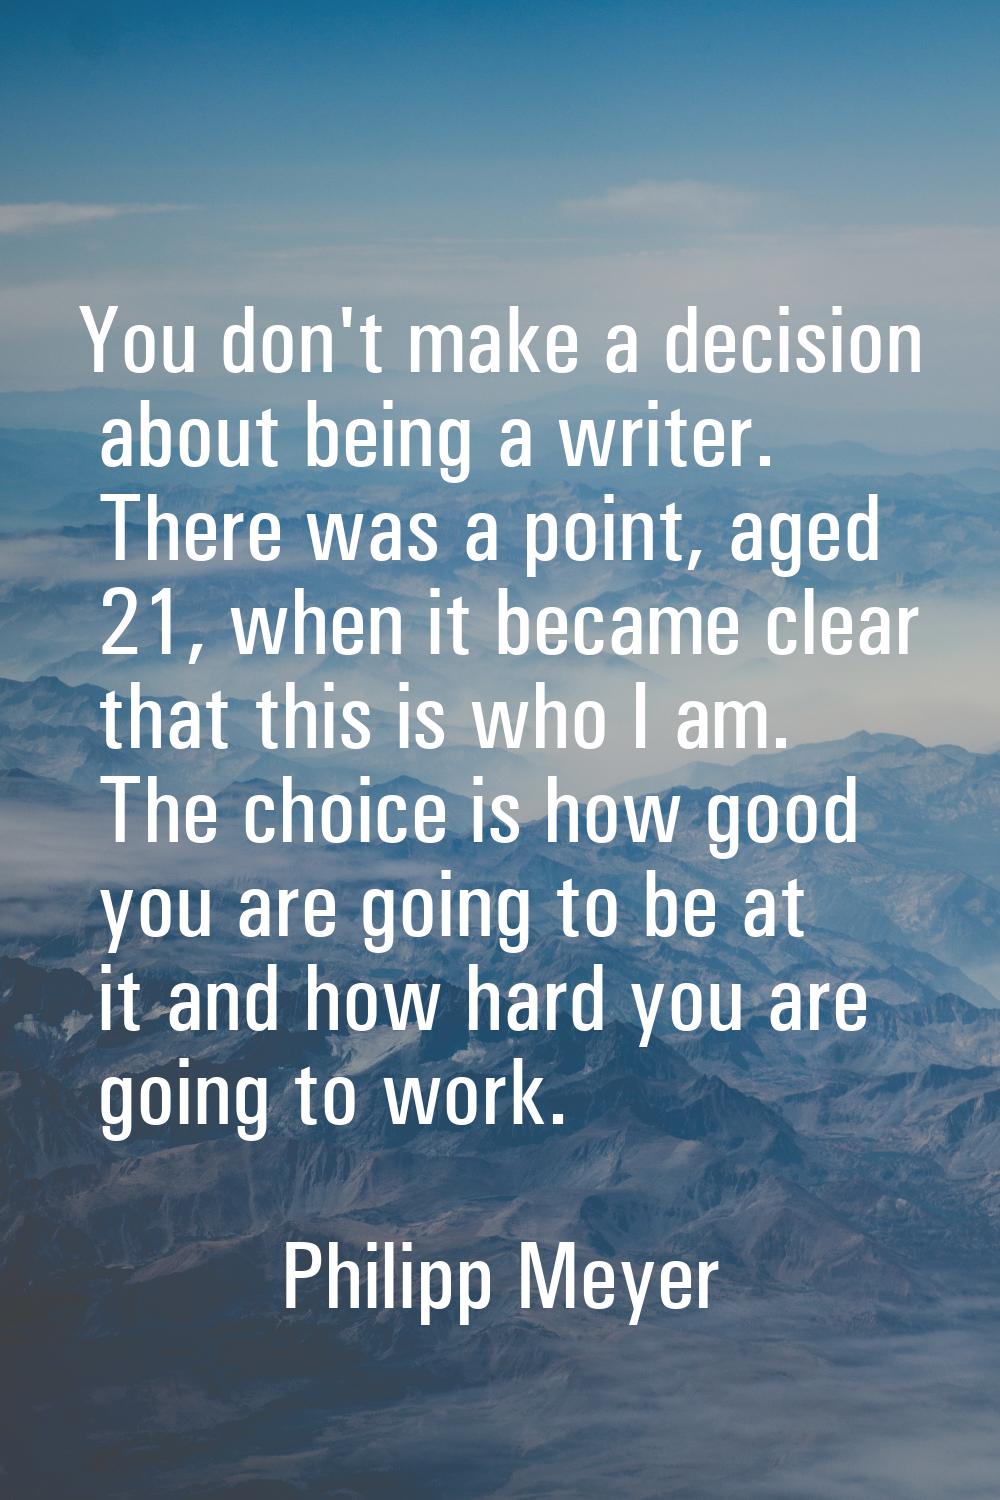 You don't make a decision about being a writer. There was a point, aged 21, when it became clear th